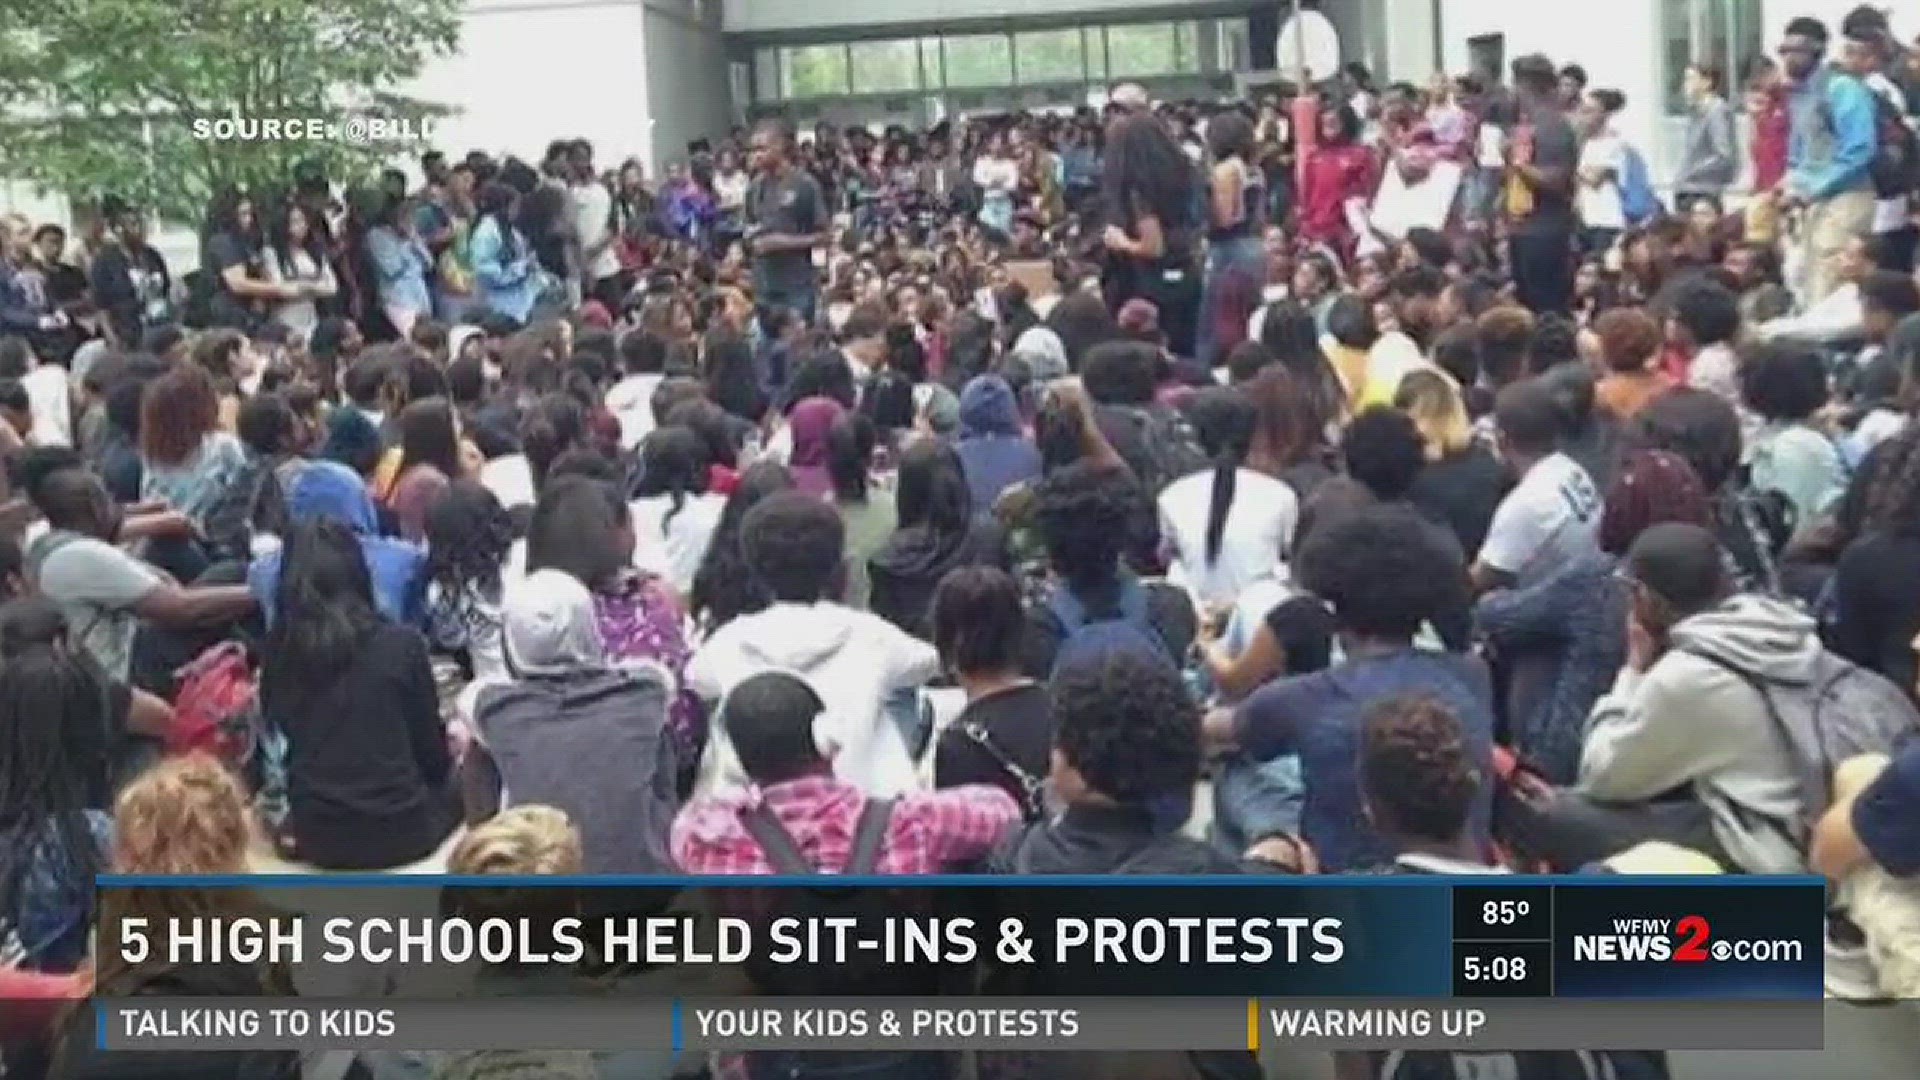 5 High Schools Held Sit-Ins & Protests